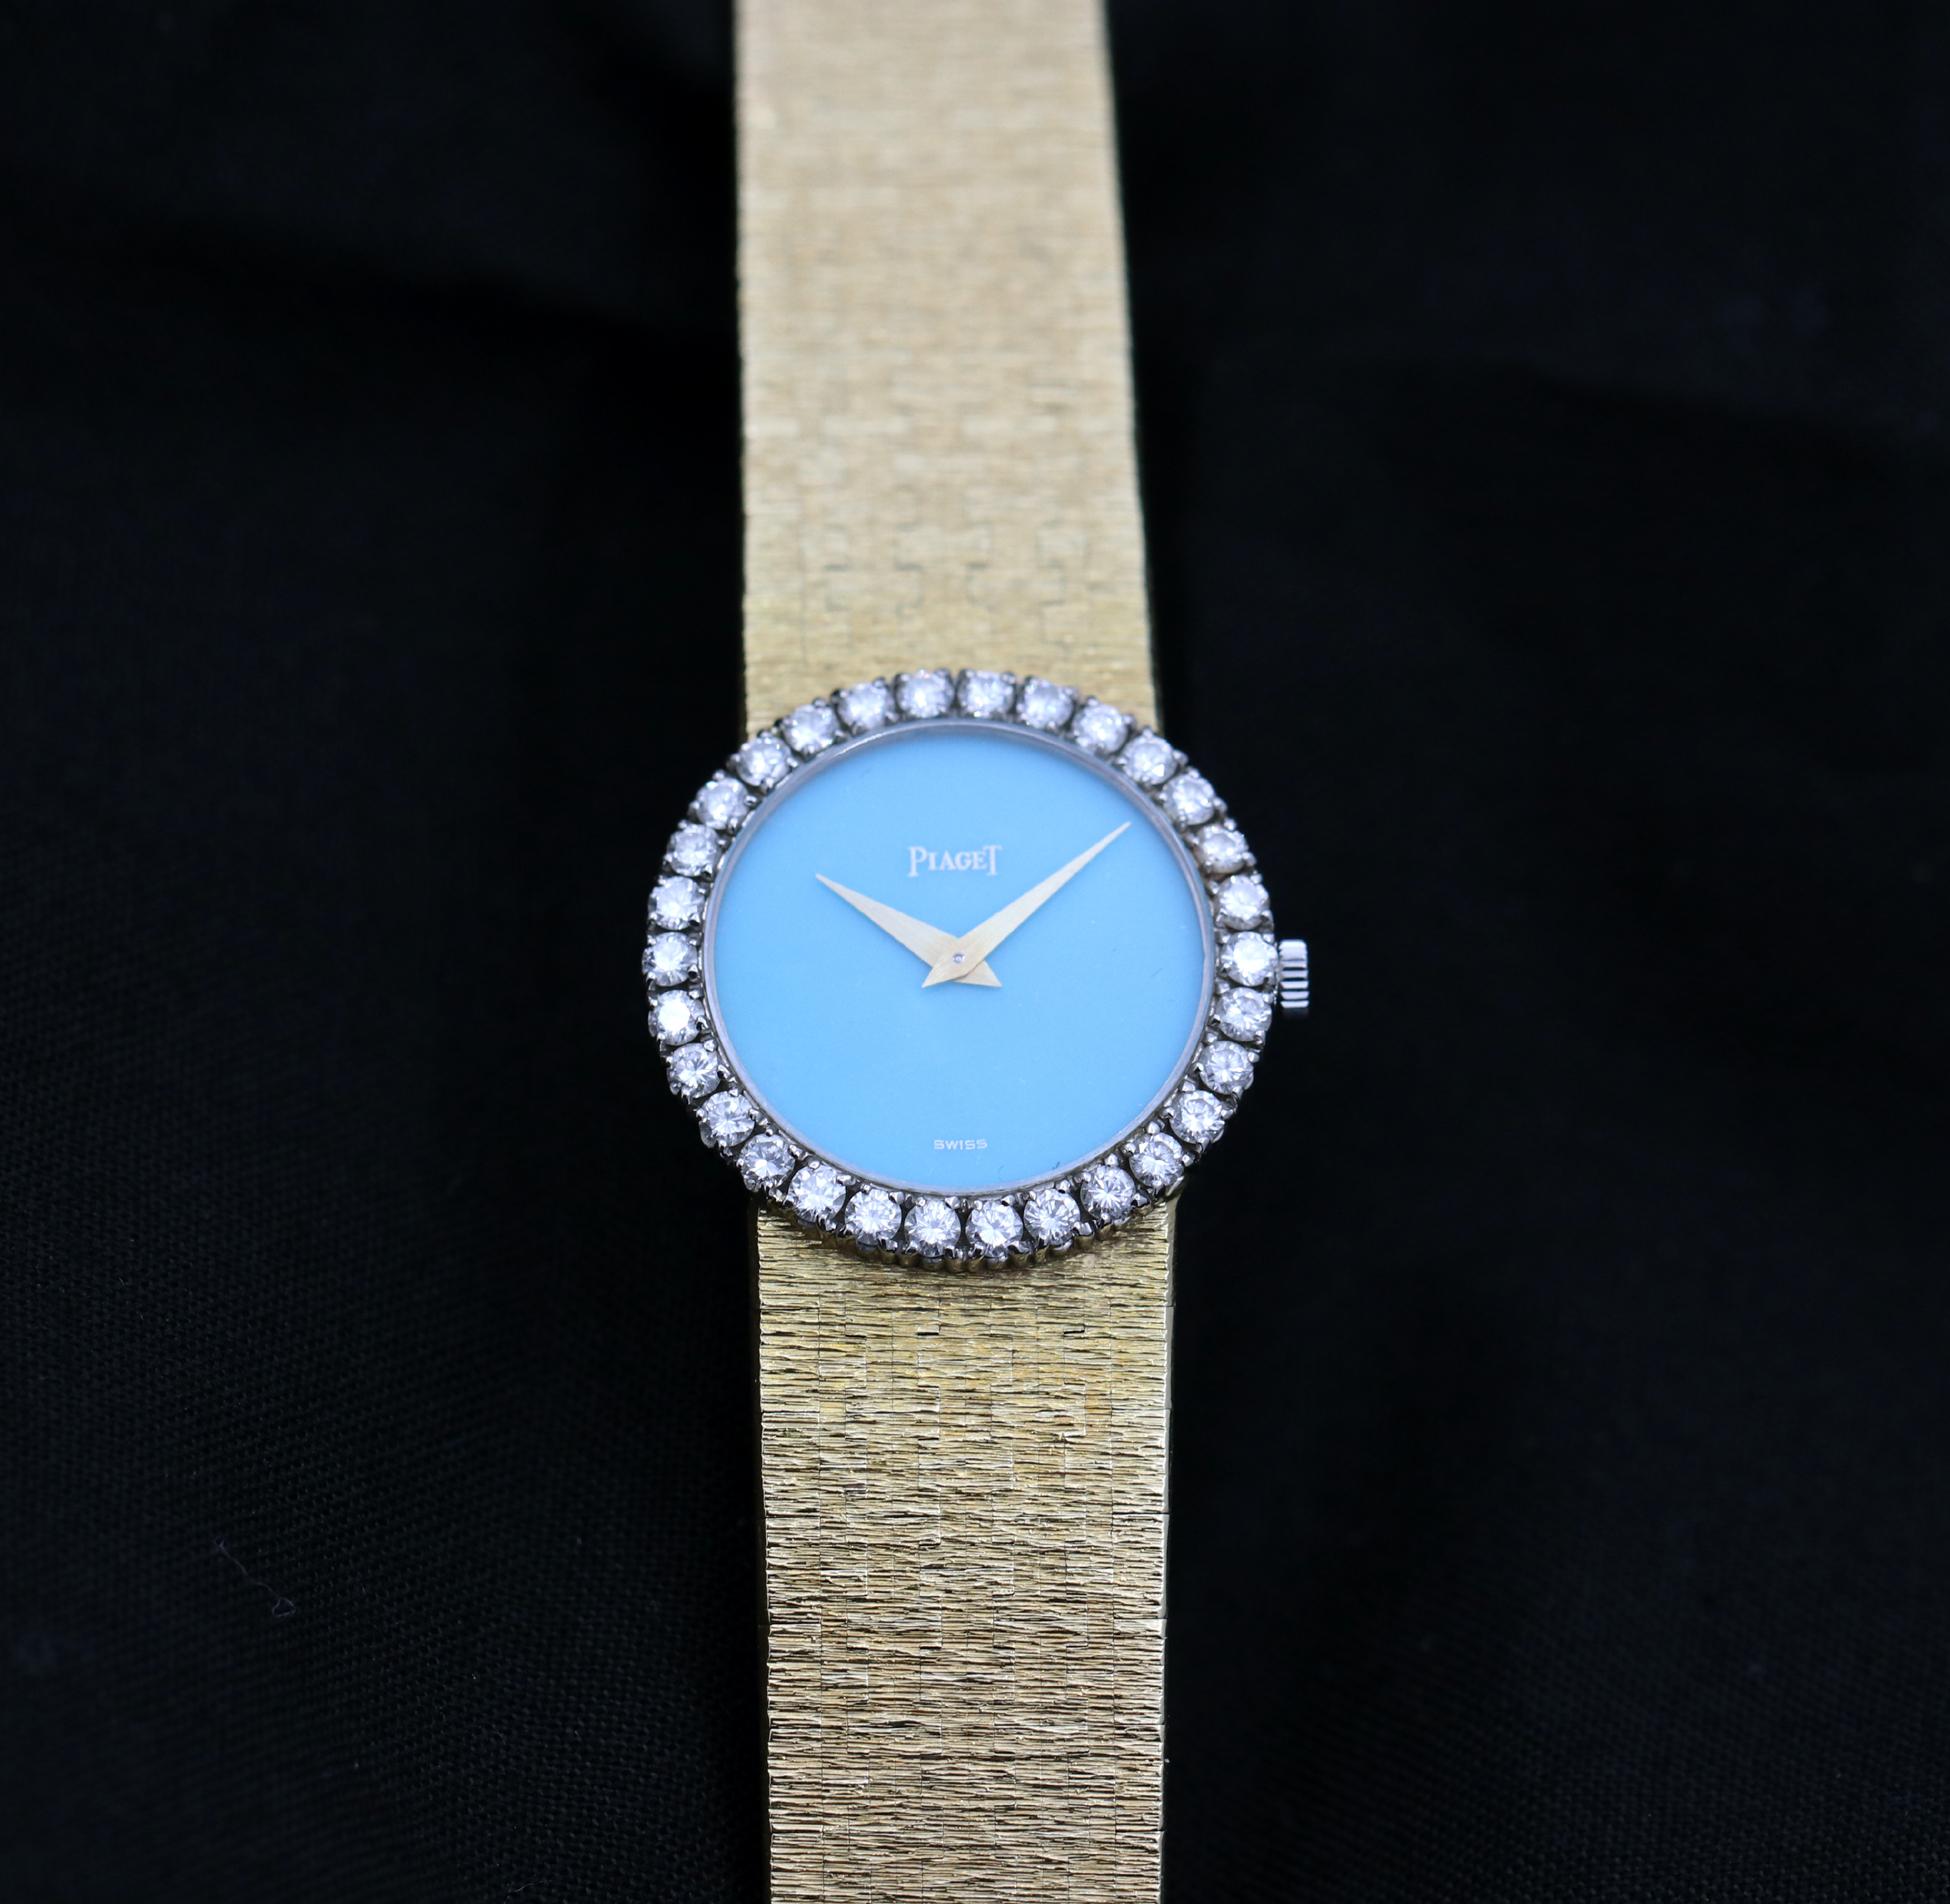 Women's Gold Piaget Wristwatch with Turquoise Dial and Diamond Bezel